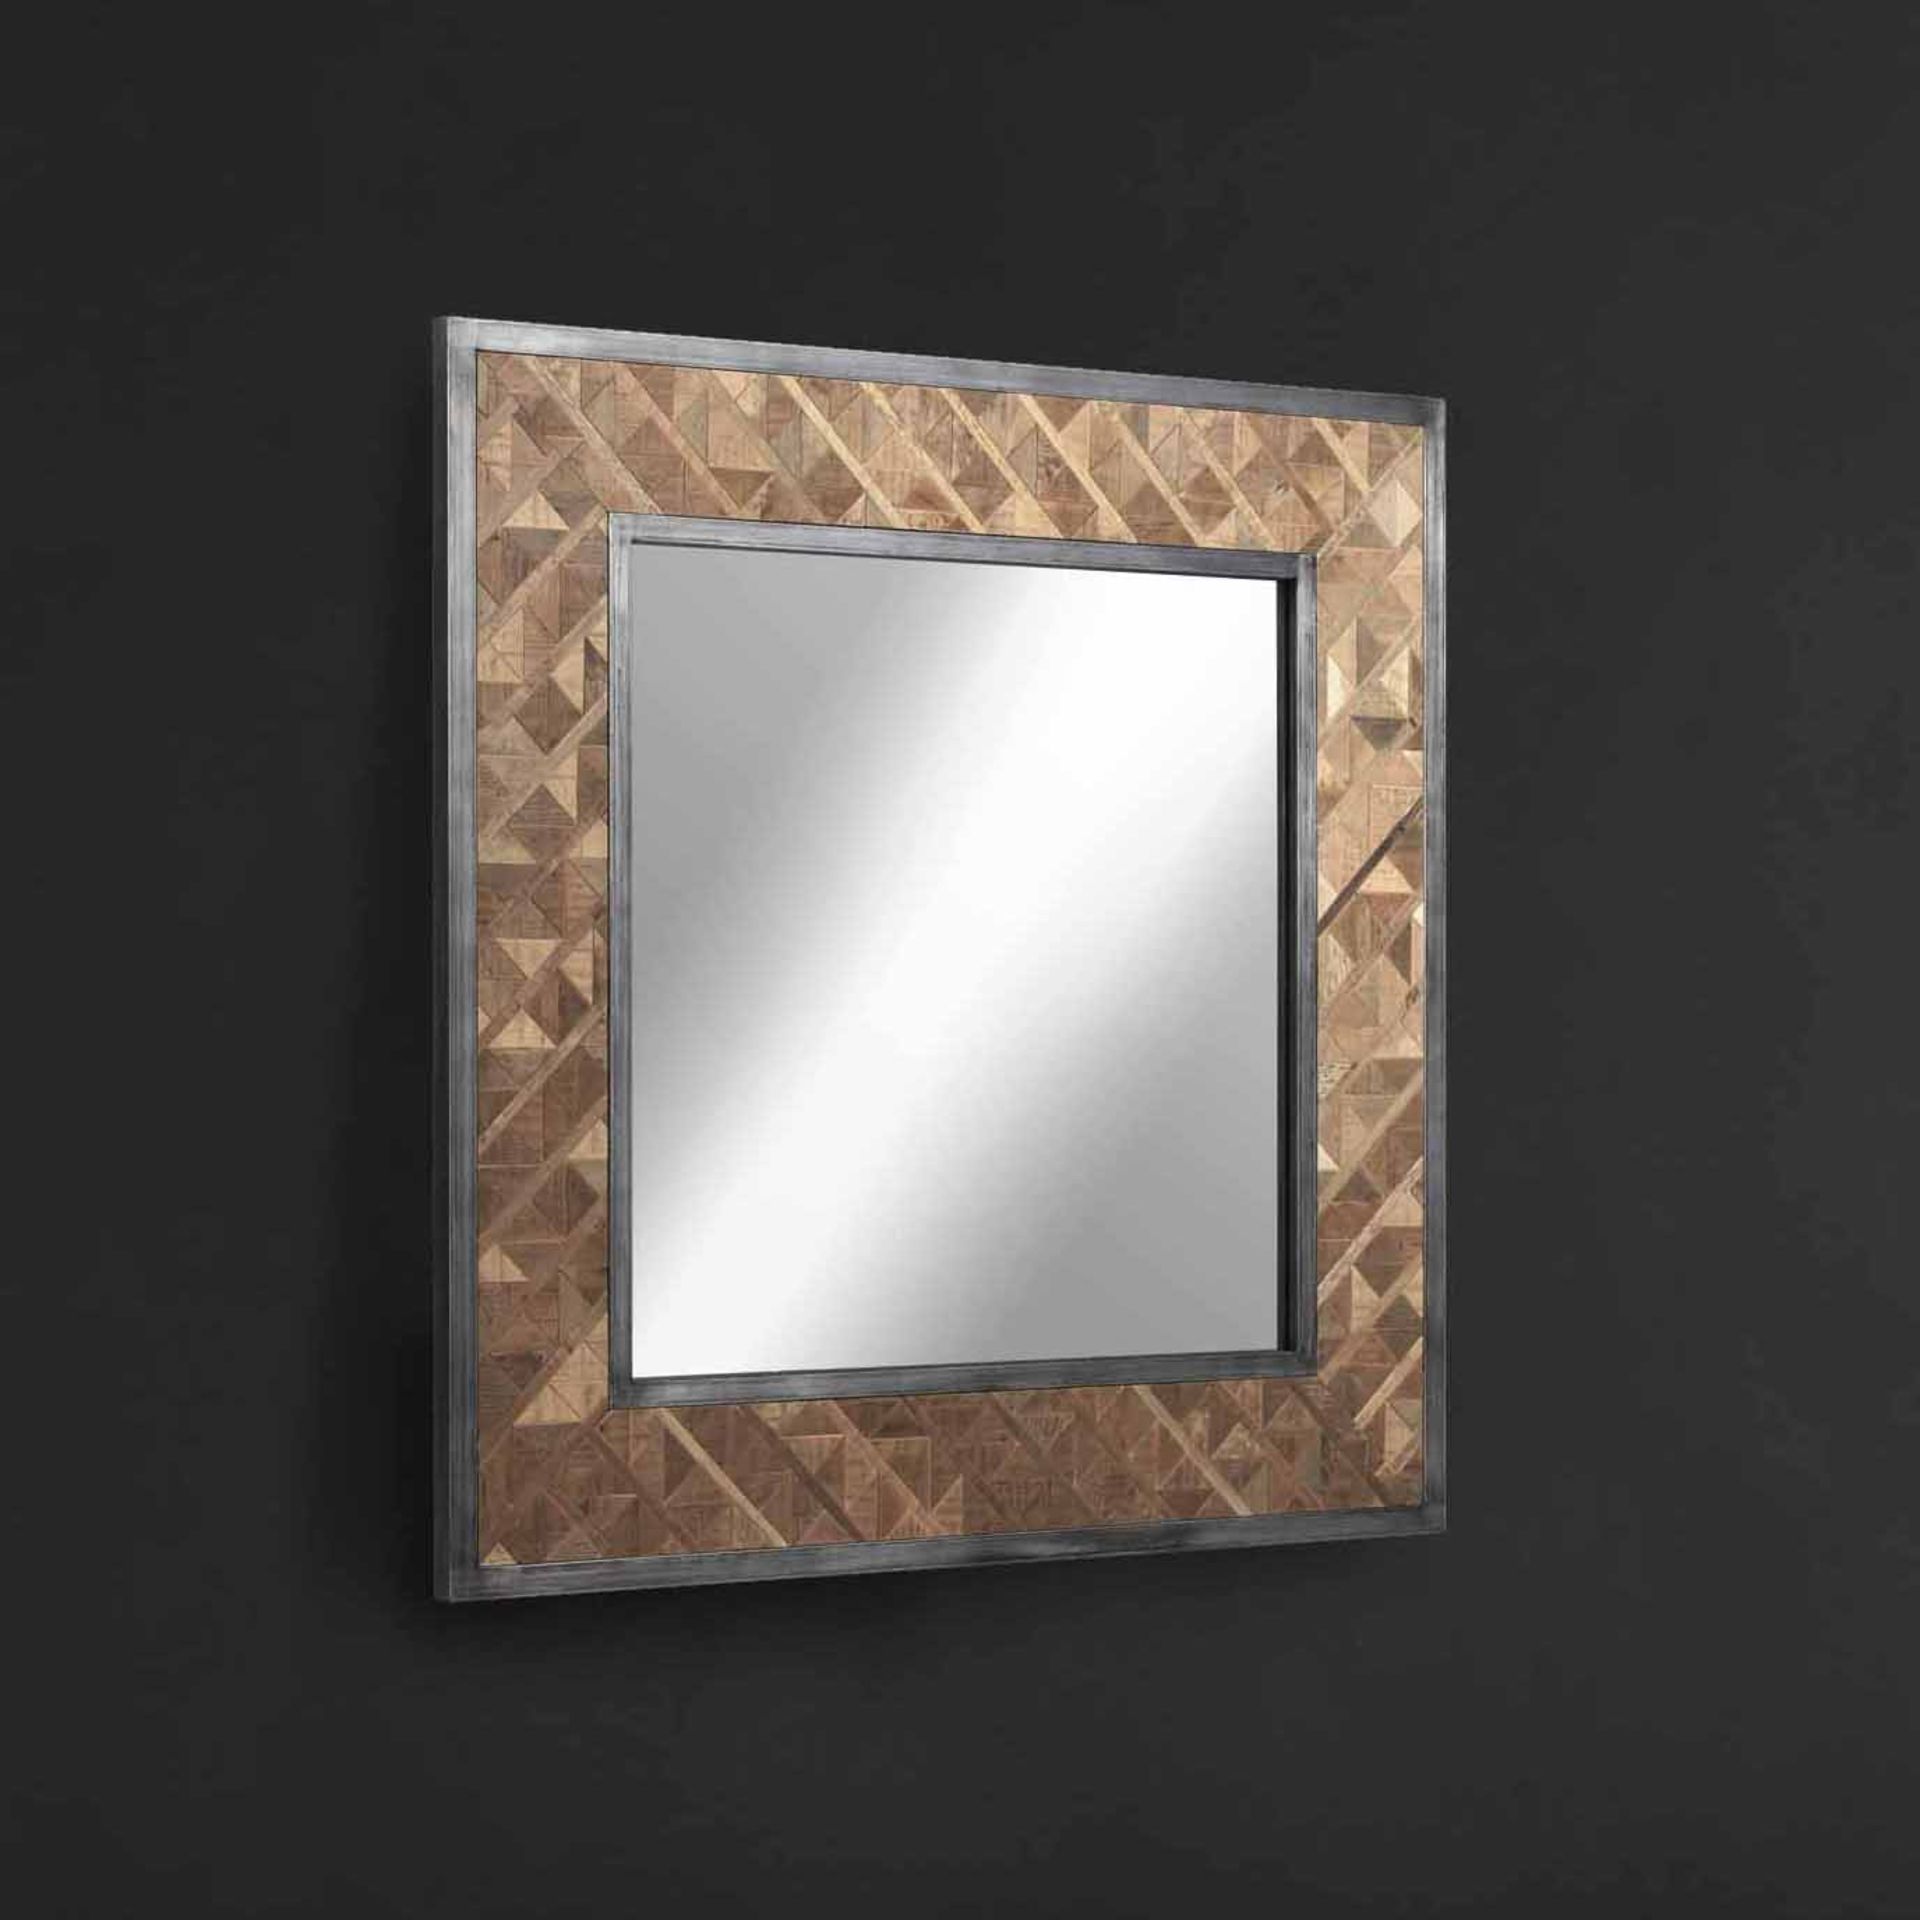 Vestige Industrial Mirror – Square “A Modern Take On Old Timber” A Classic Vintage Material Is Given